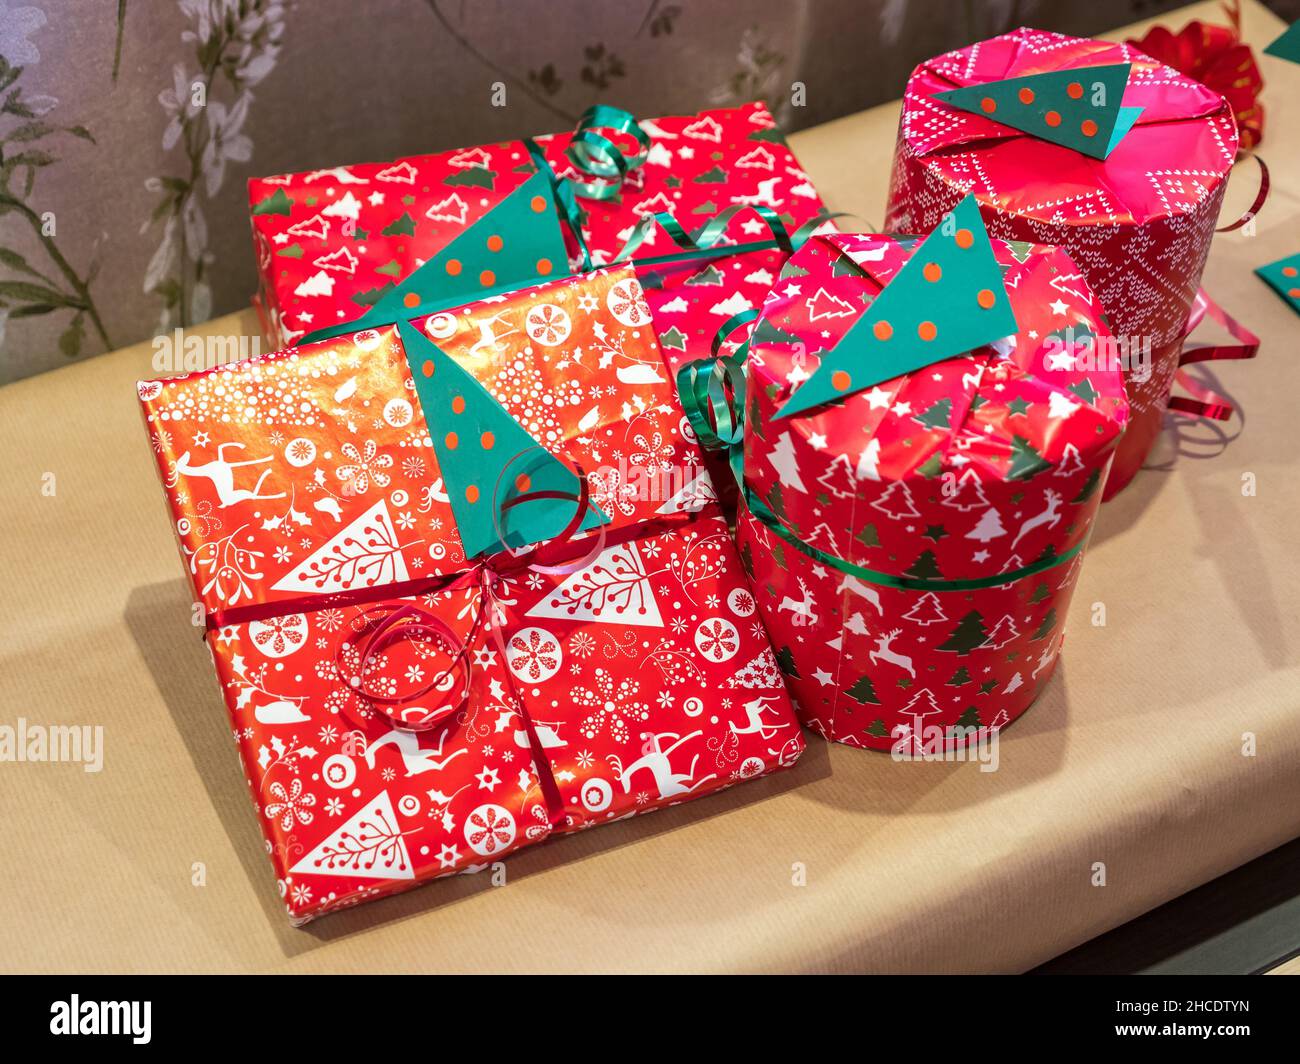 Group of Christmas presents wrapped in colorful wrapping paper Stock Photo